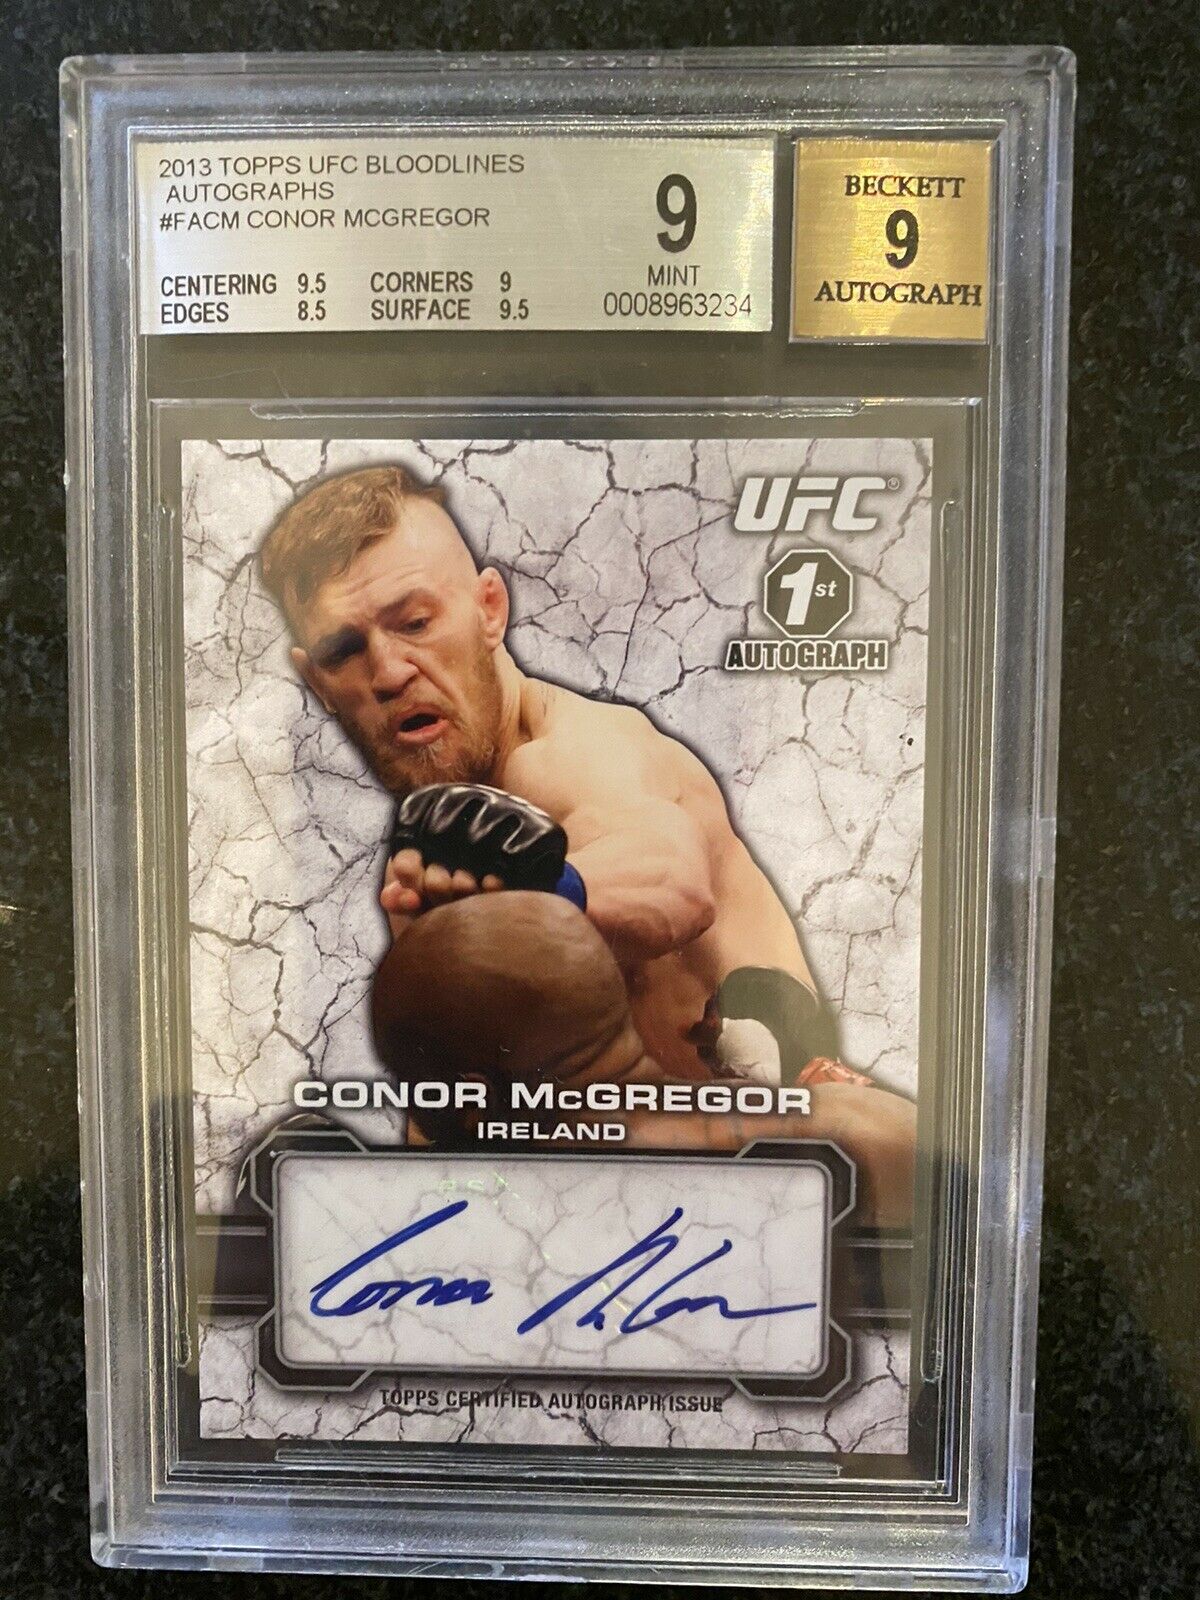 Do UFC trading cards have value?